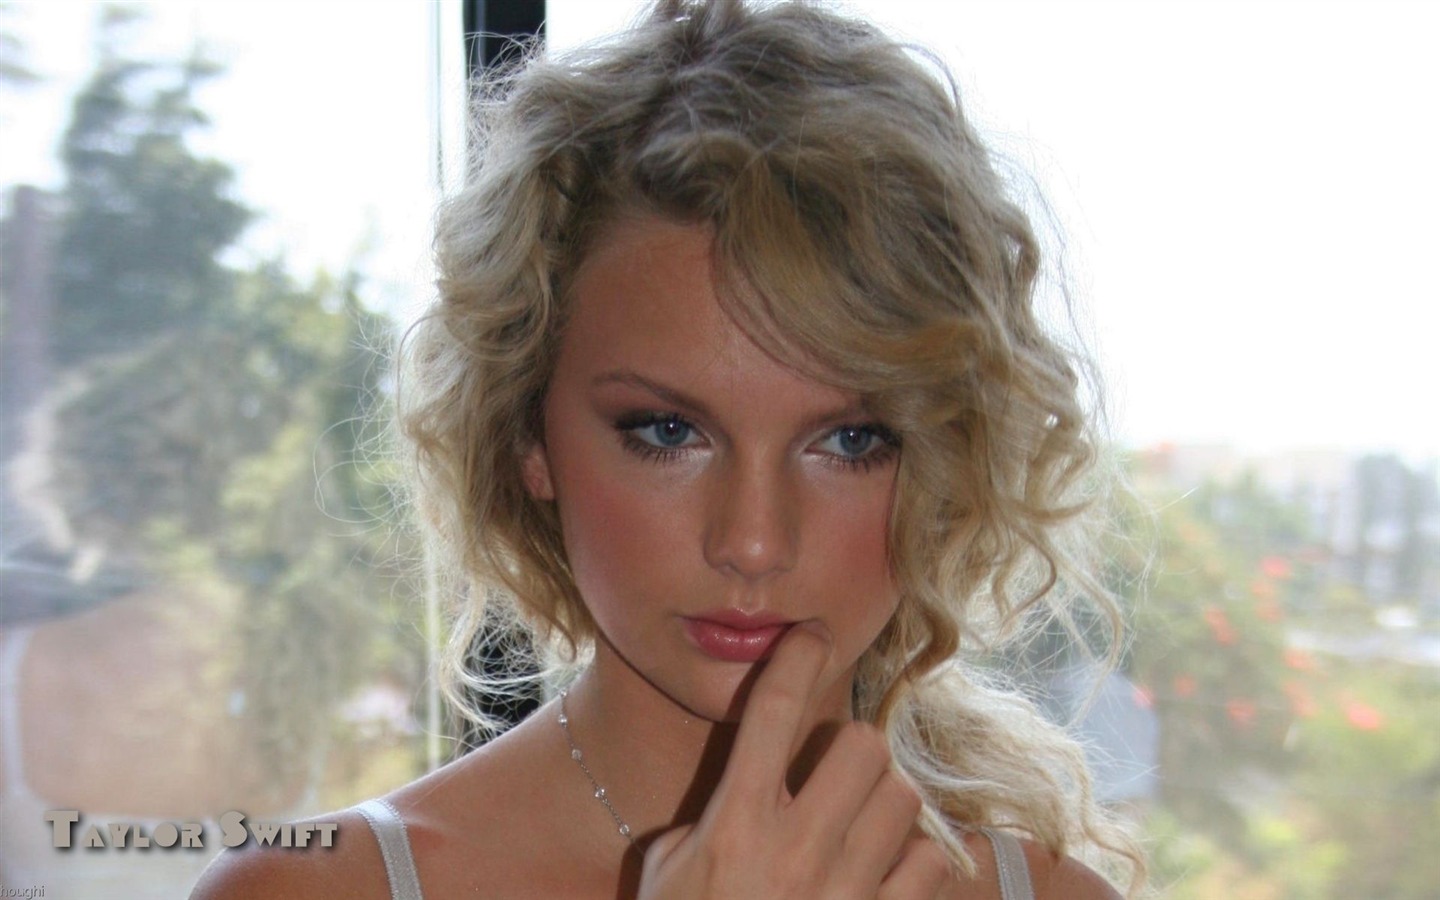 Taylor Swift #074 - 1440x900 Wallpapers Pictures Photos Images